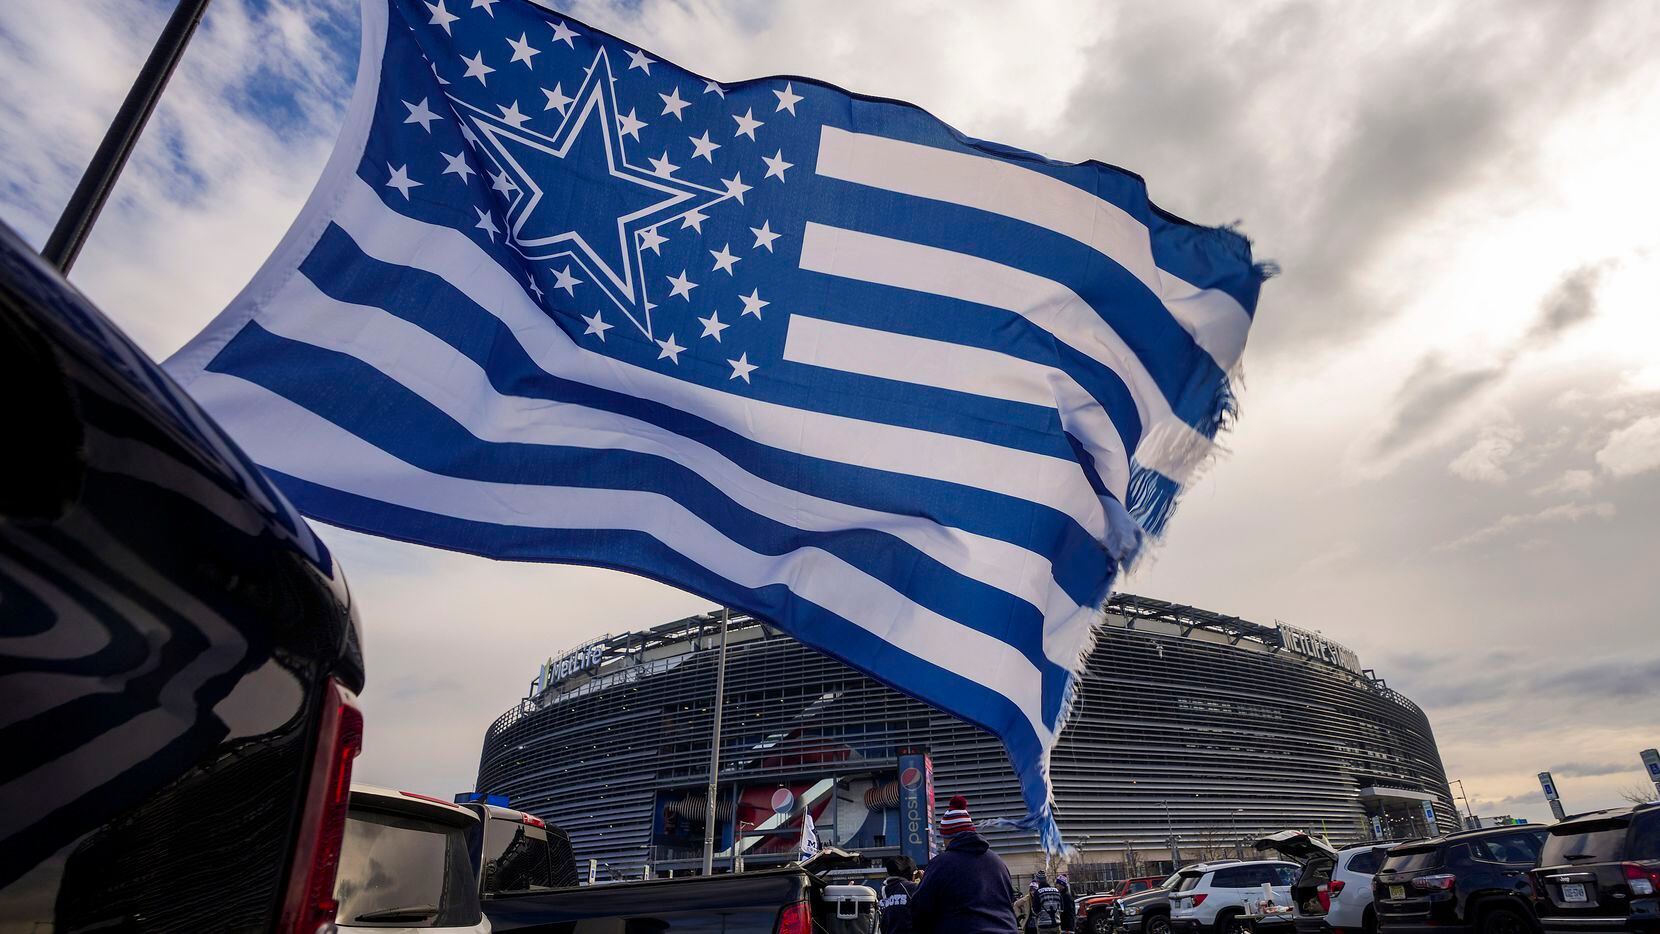 A Dallas Cowboys flag flutters in the wind as fans tailgate before an NFL football game...